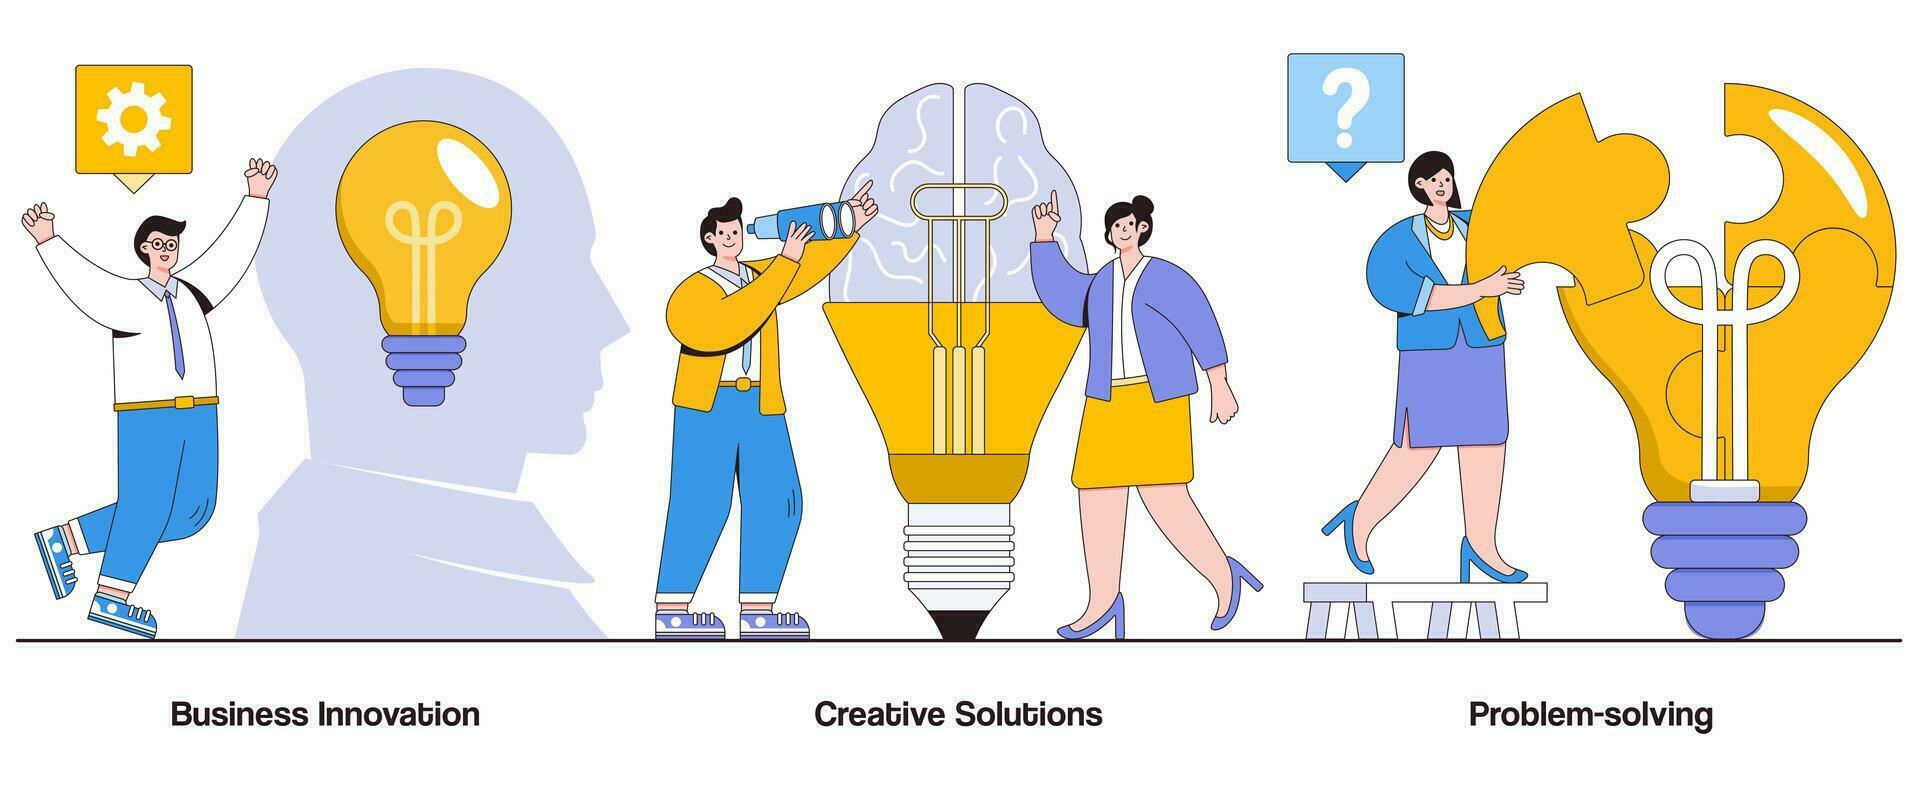 Business innovation, creative solutions, problem-solving concept with character. Innovative mindset abstract vector illustration set. Out-of-the-box thinking, continuous improvement metaphor